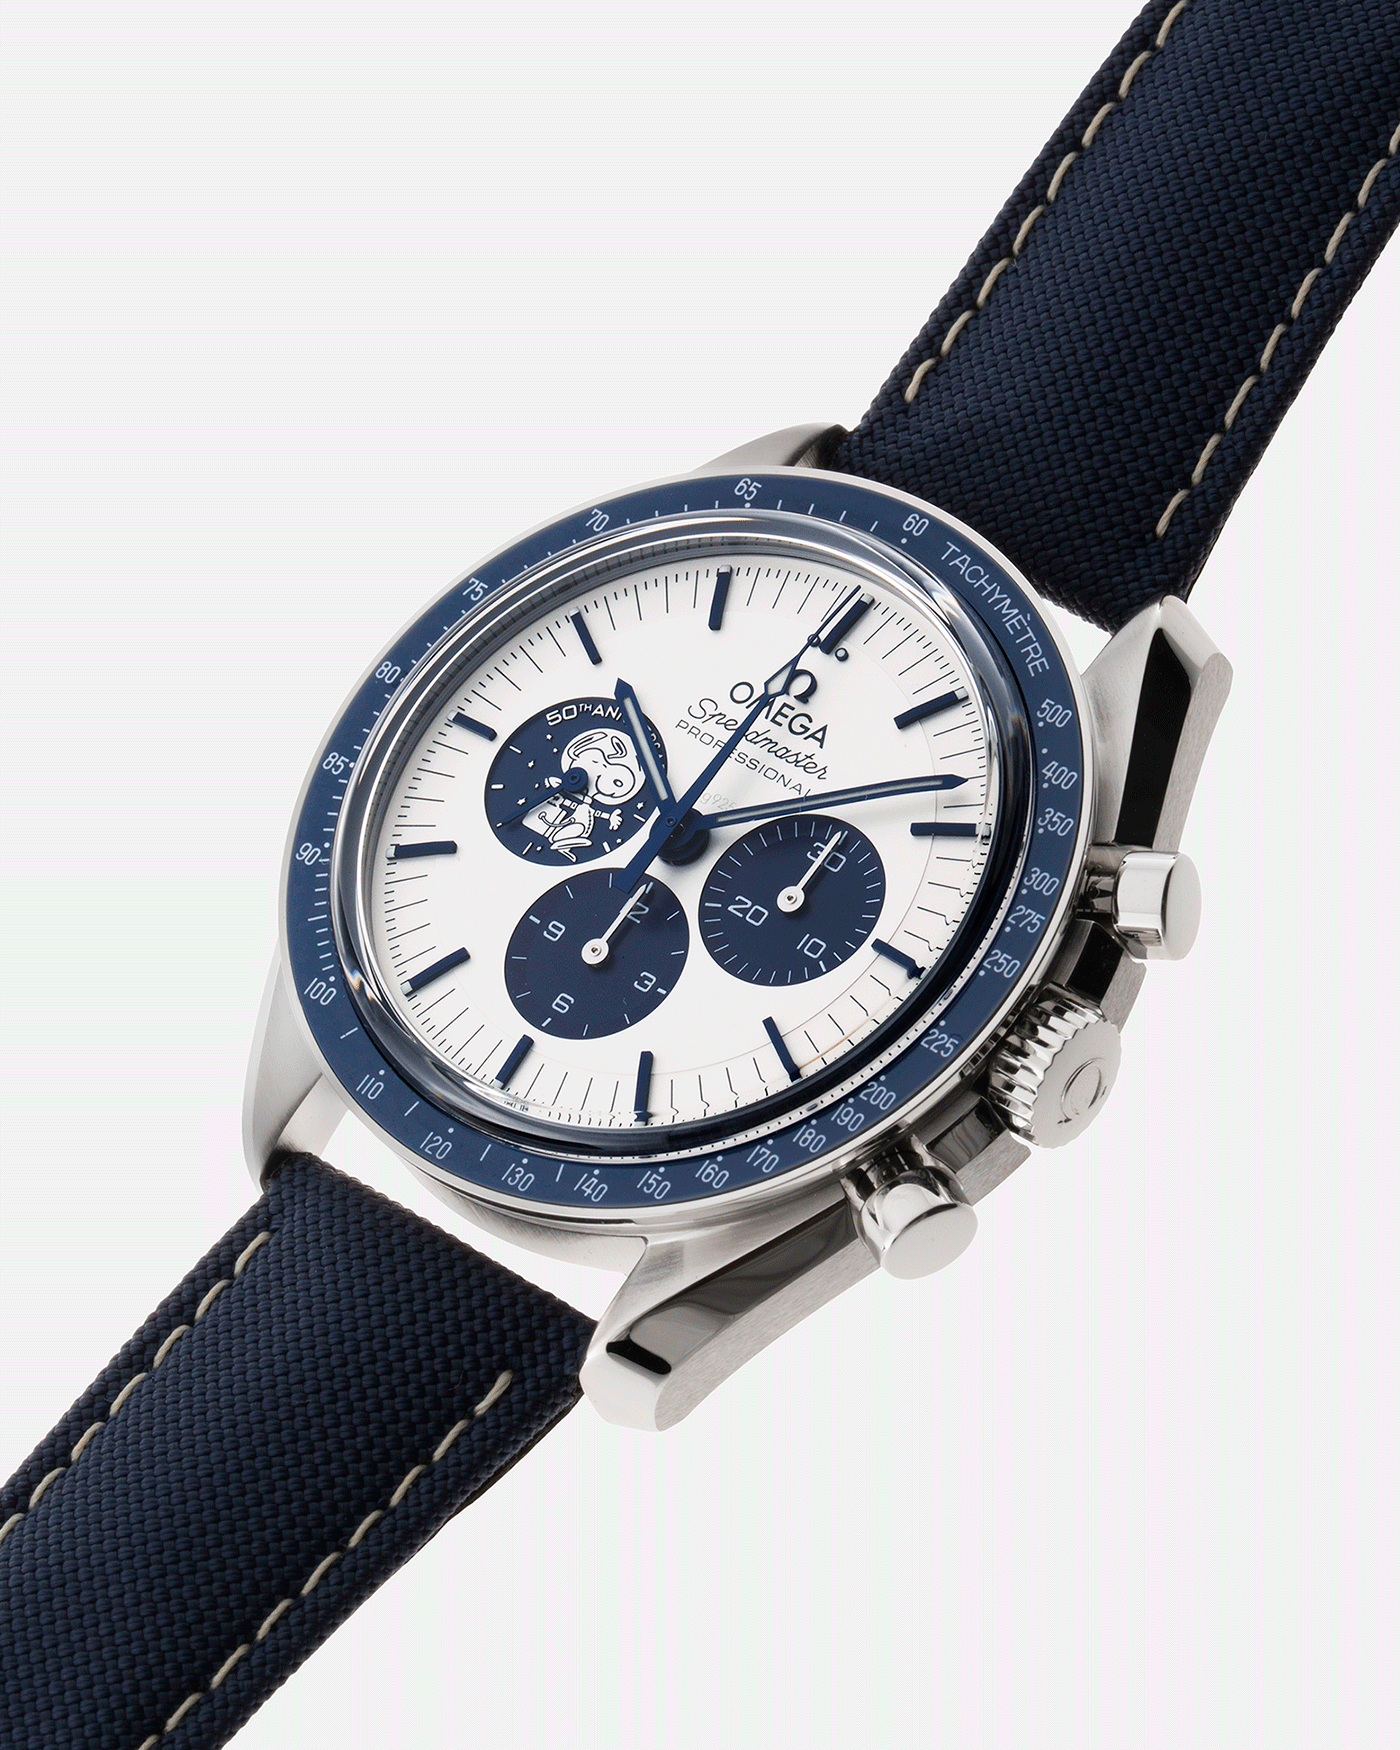 Brand: Omega Year: 2021 Model: Speedmaster Silver Snoopy Award 50th Anniversary Reference Number: 310.32.42.50.02.001 Material: Stainless Steel Movement: Omega in-house Cal. 3861 Case Diameter: 42mm Bracelet/Strap: Omega Blue Coated Nylon Fabric Strap with Omega Stainless Steel Tang Buckle